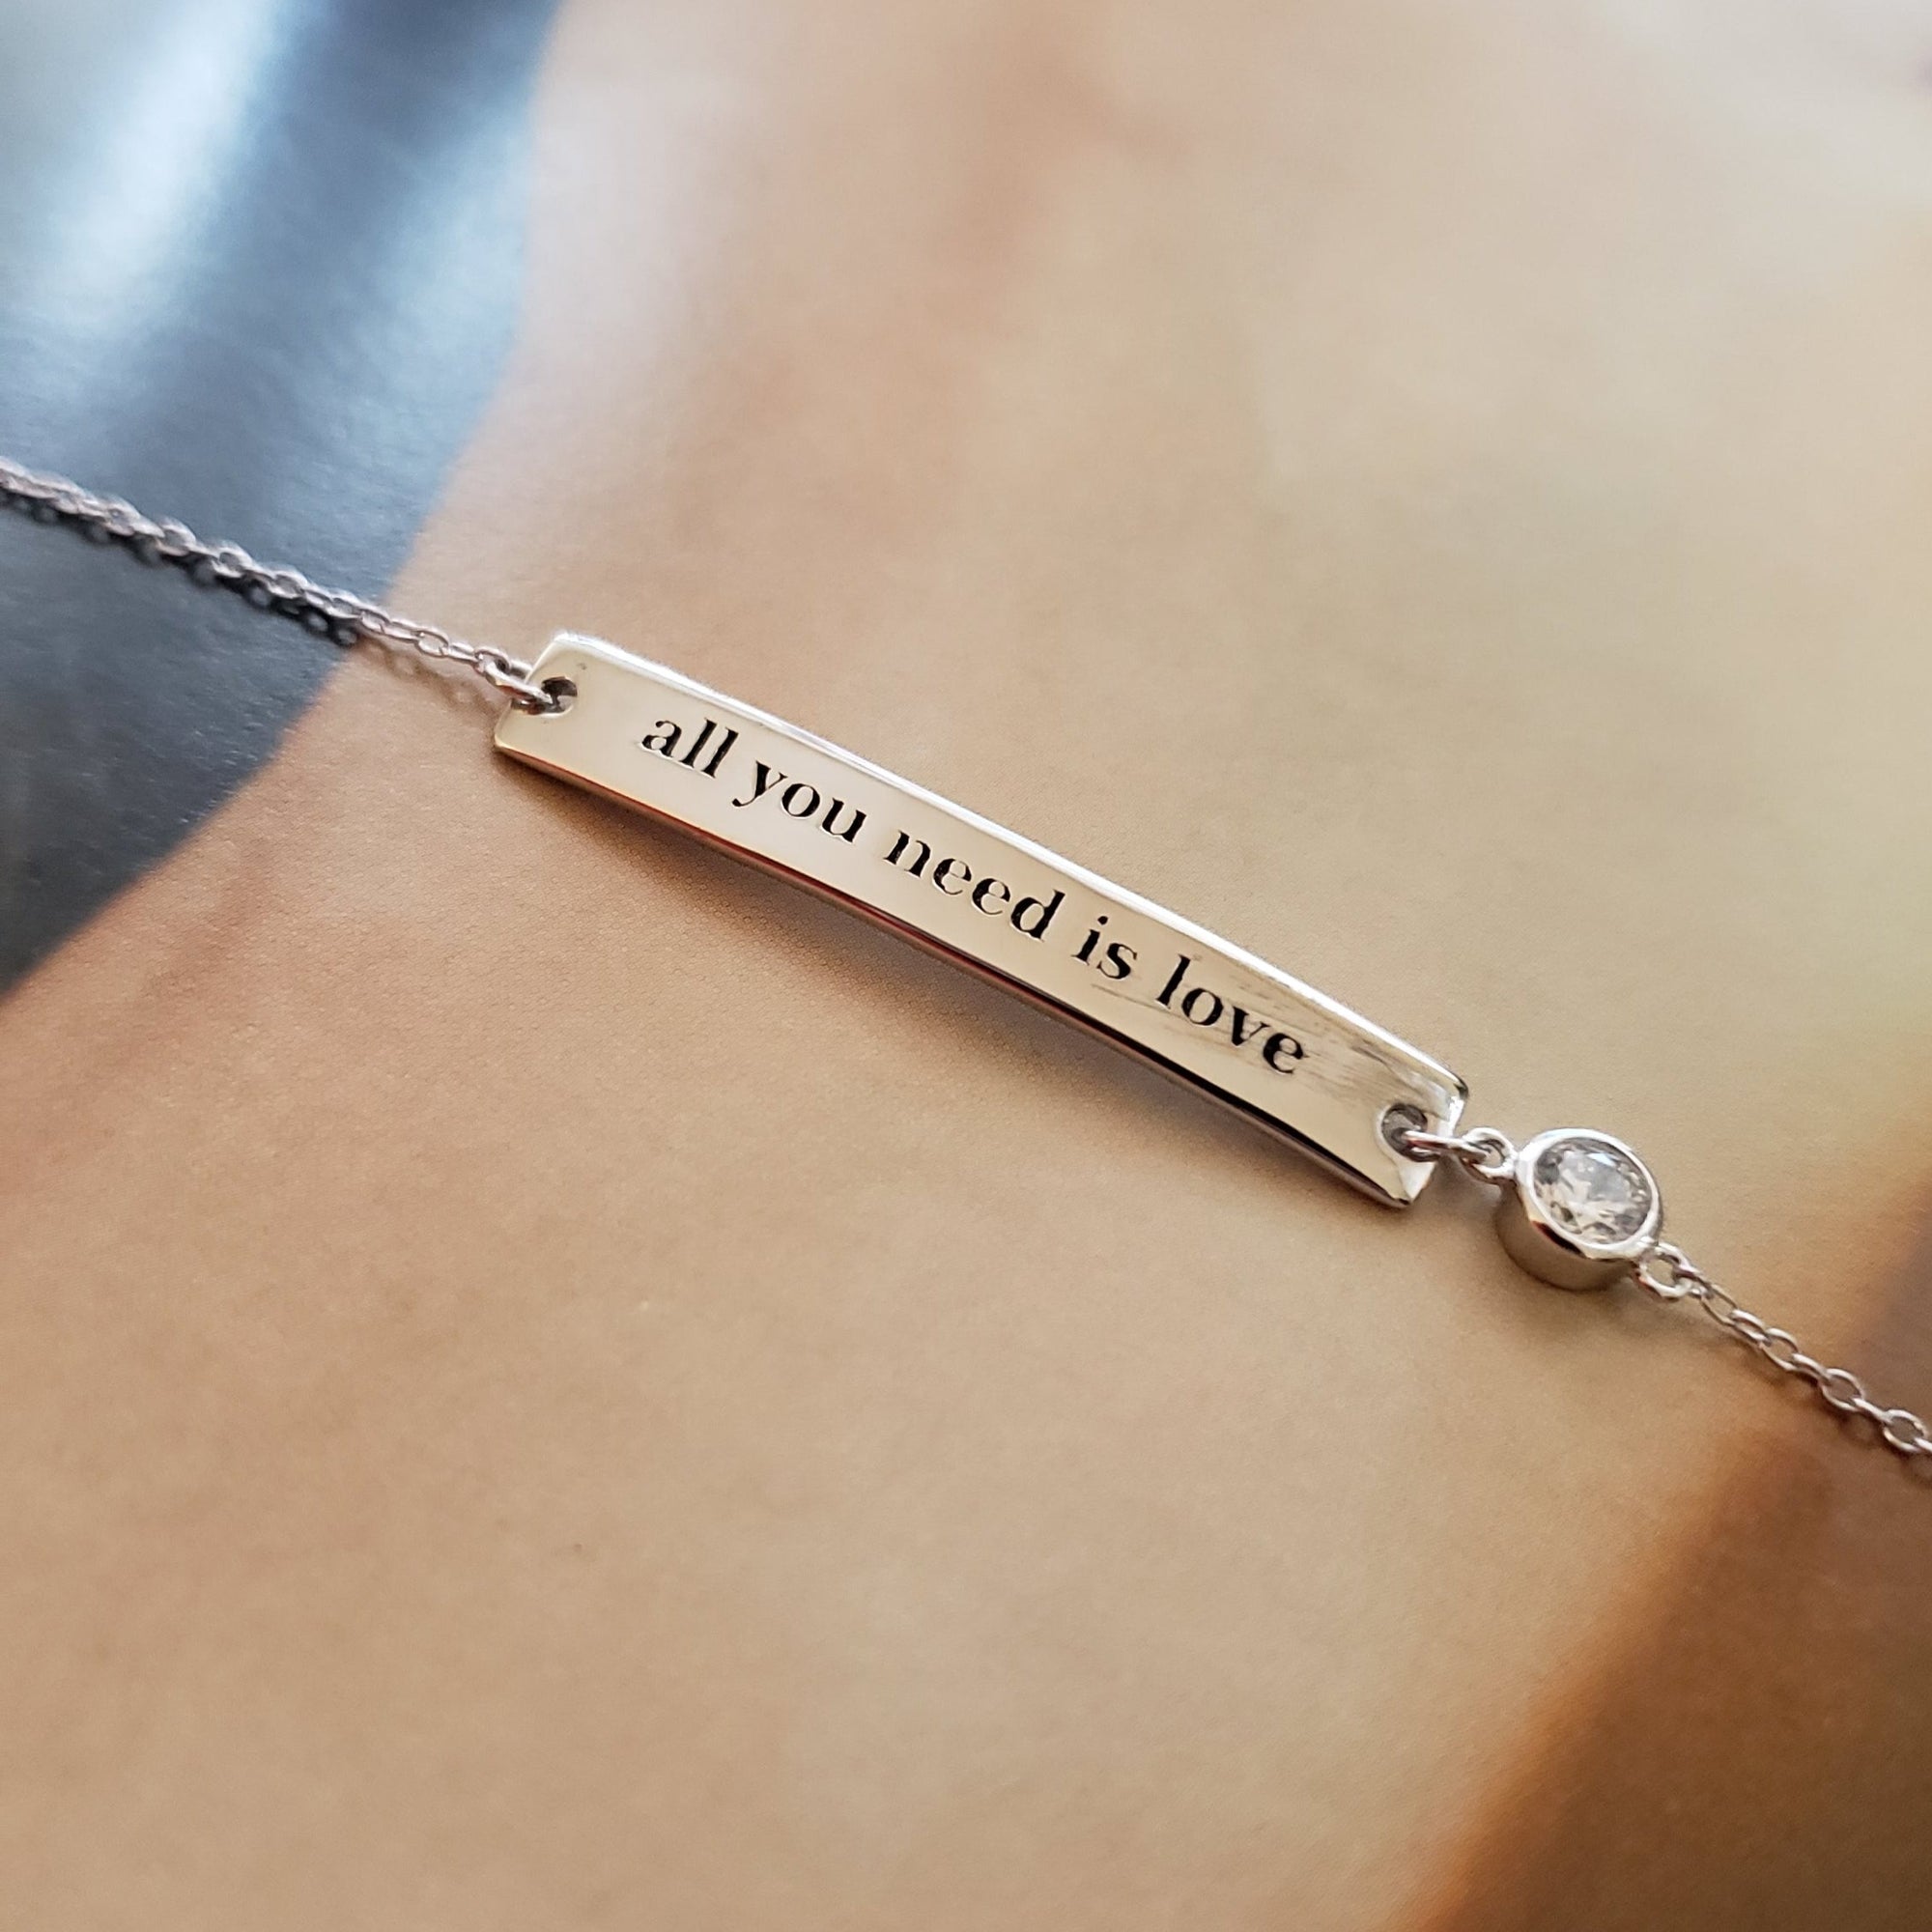 All you need is love - Bracelet